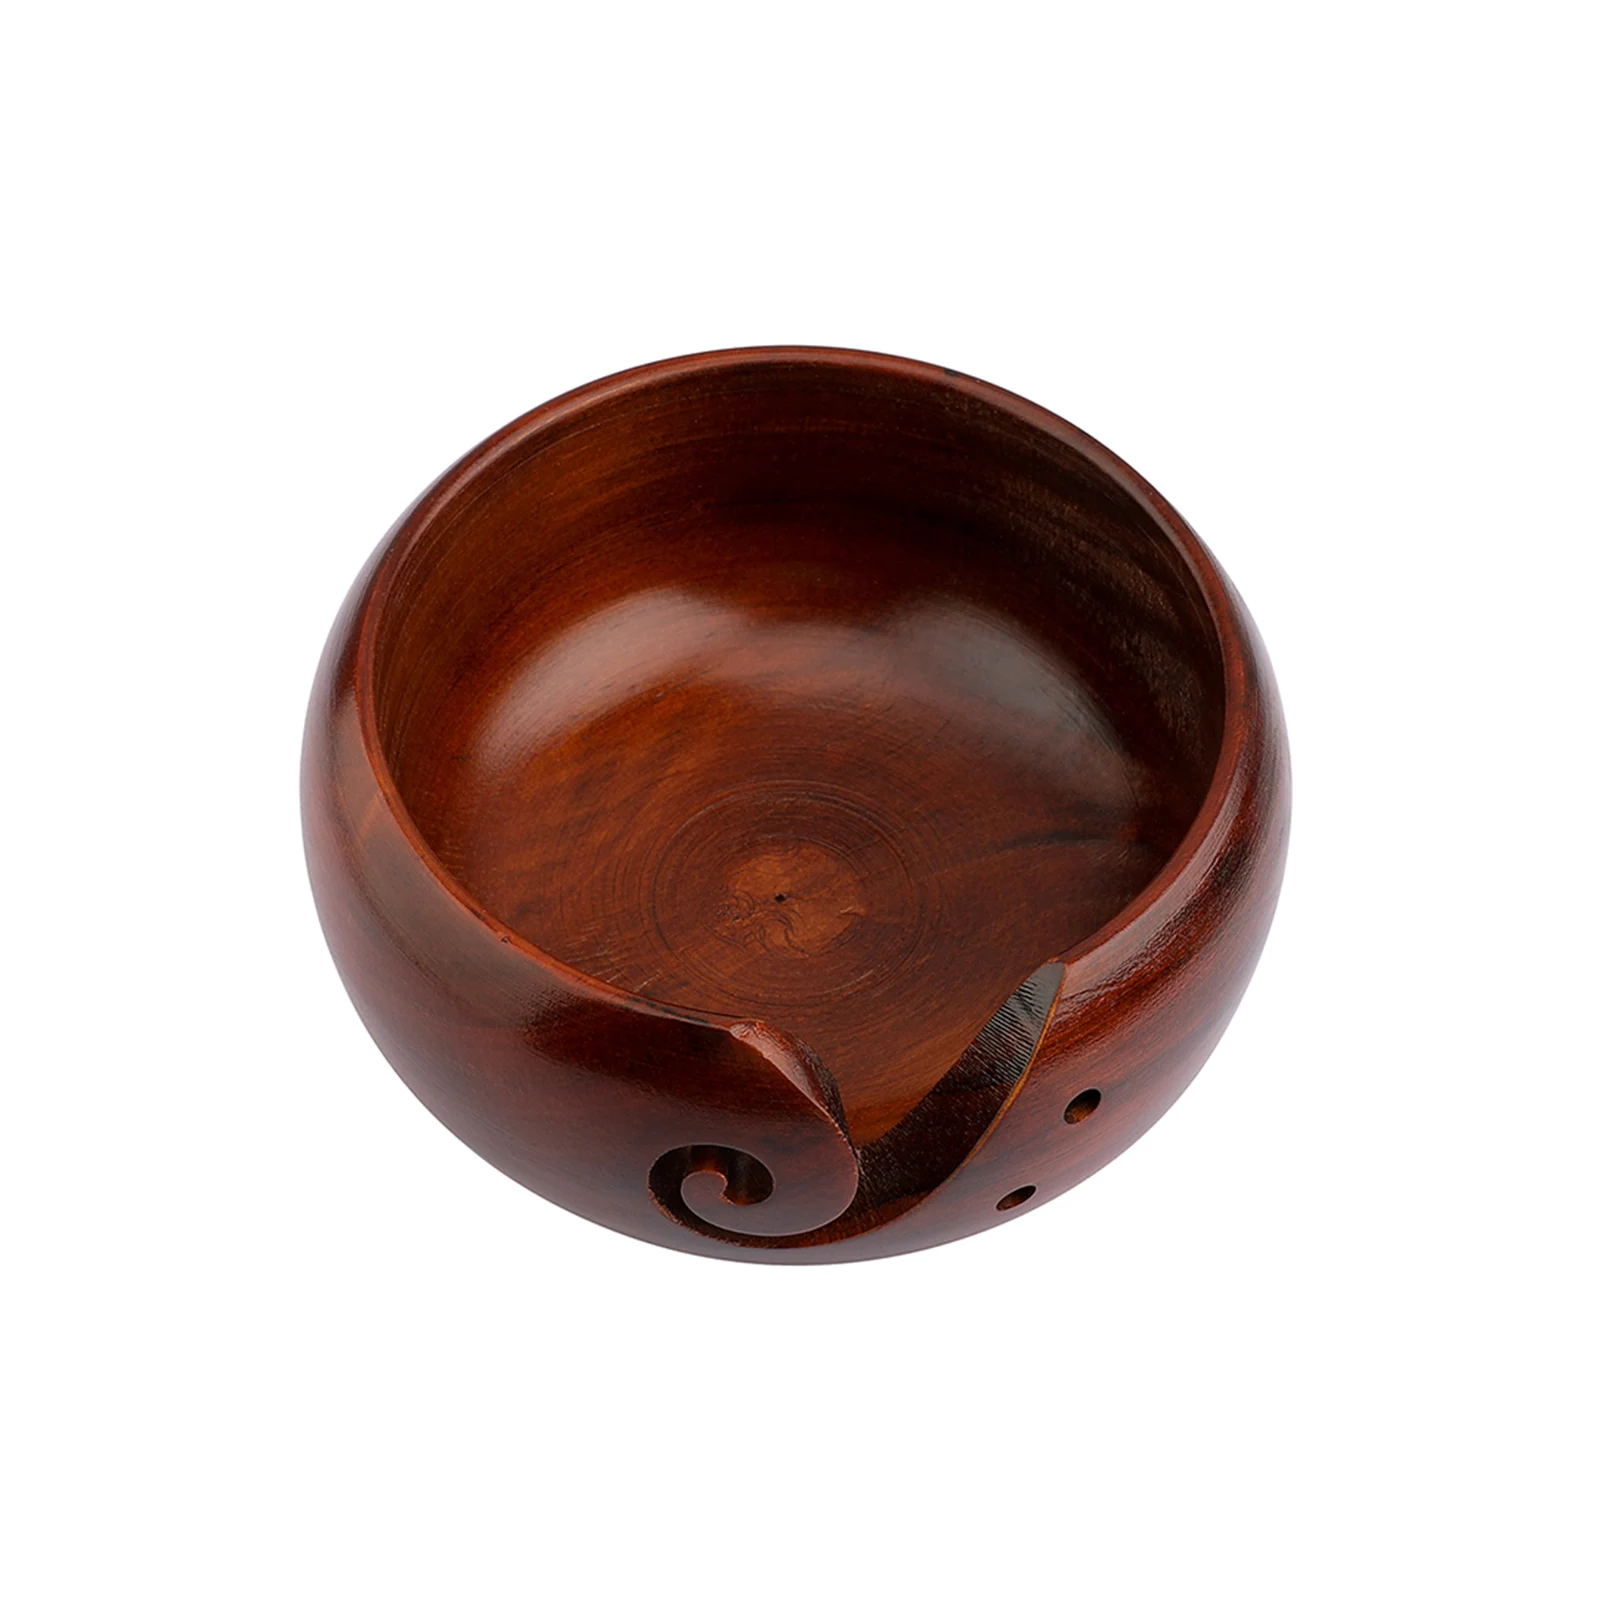 

Carved Wooden Smooth Accessories Portable Home With Holes For Knitting Crochet Storage Thread Winder Needlework Tool Yarn Bowl